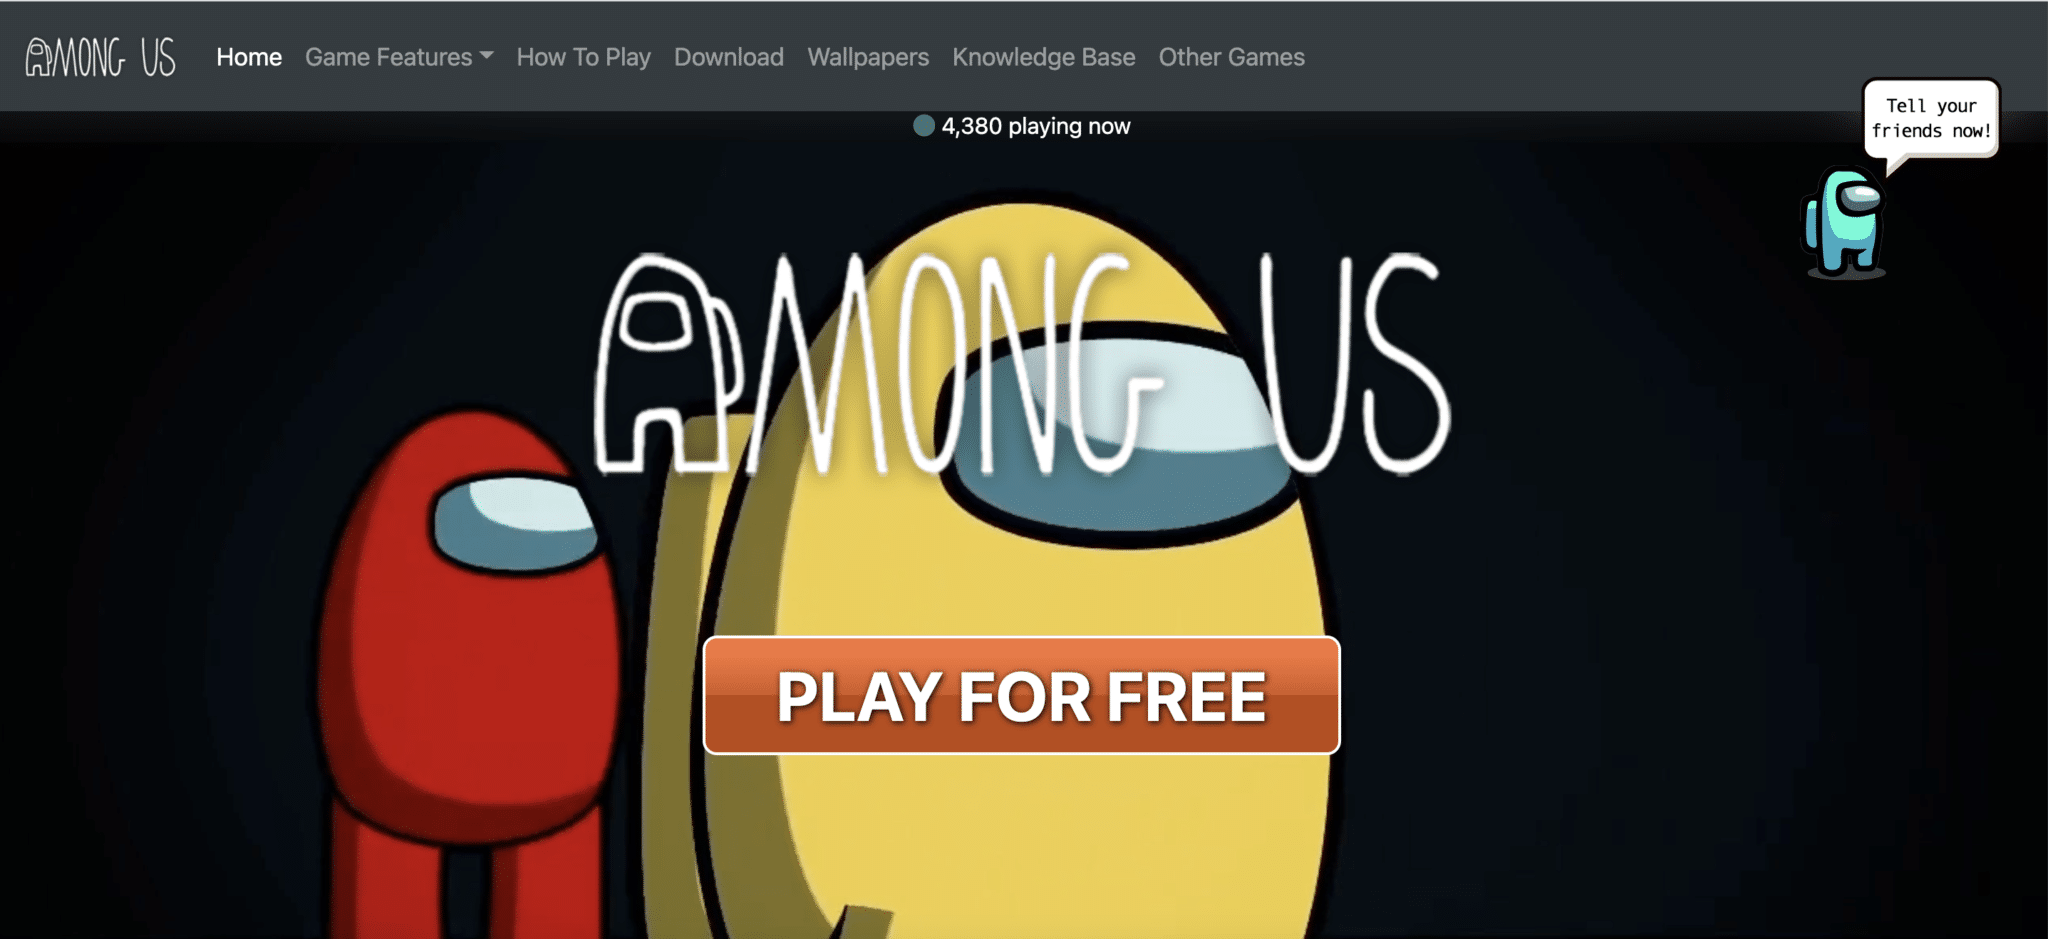 Amogus.io - Online Game - Play for Free